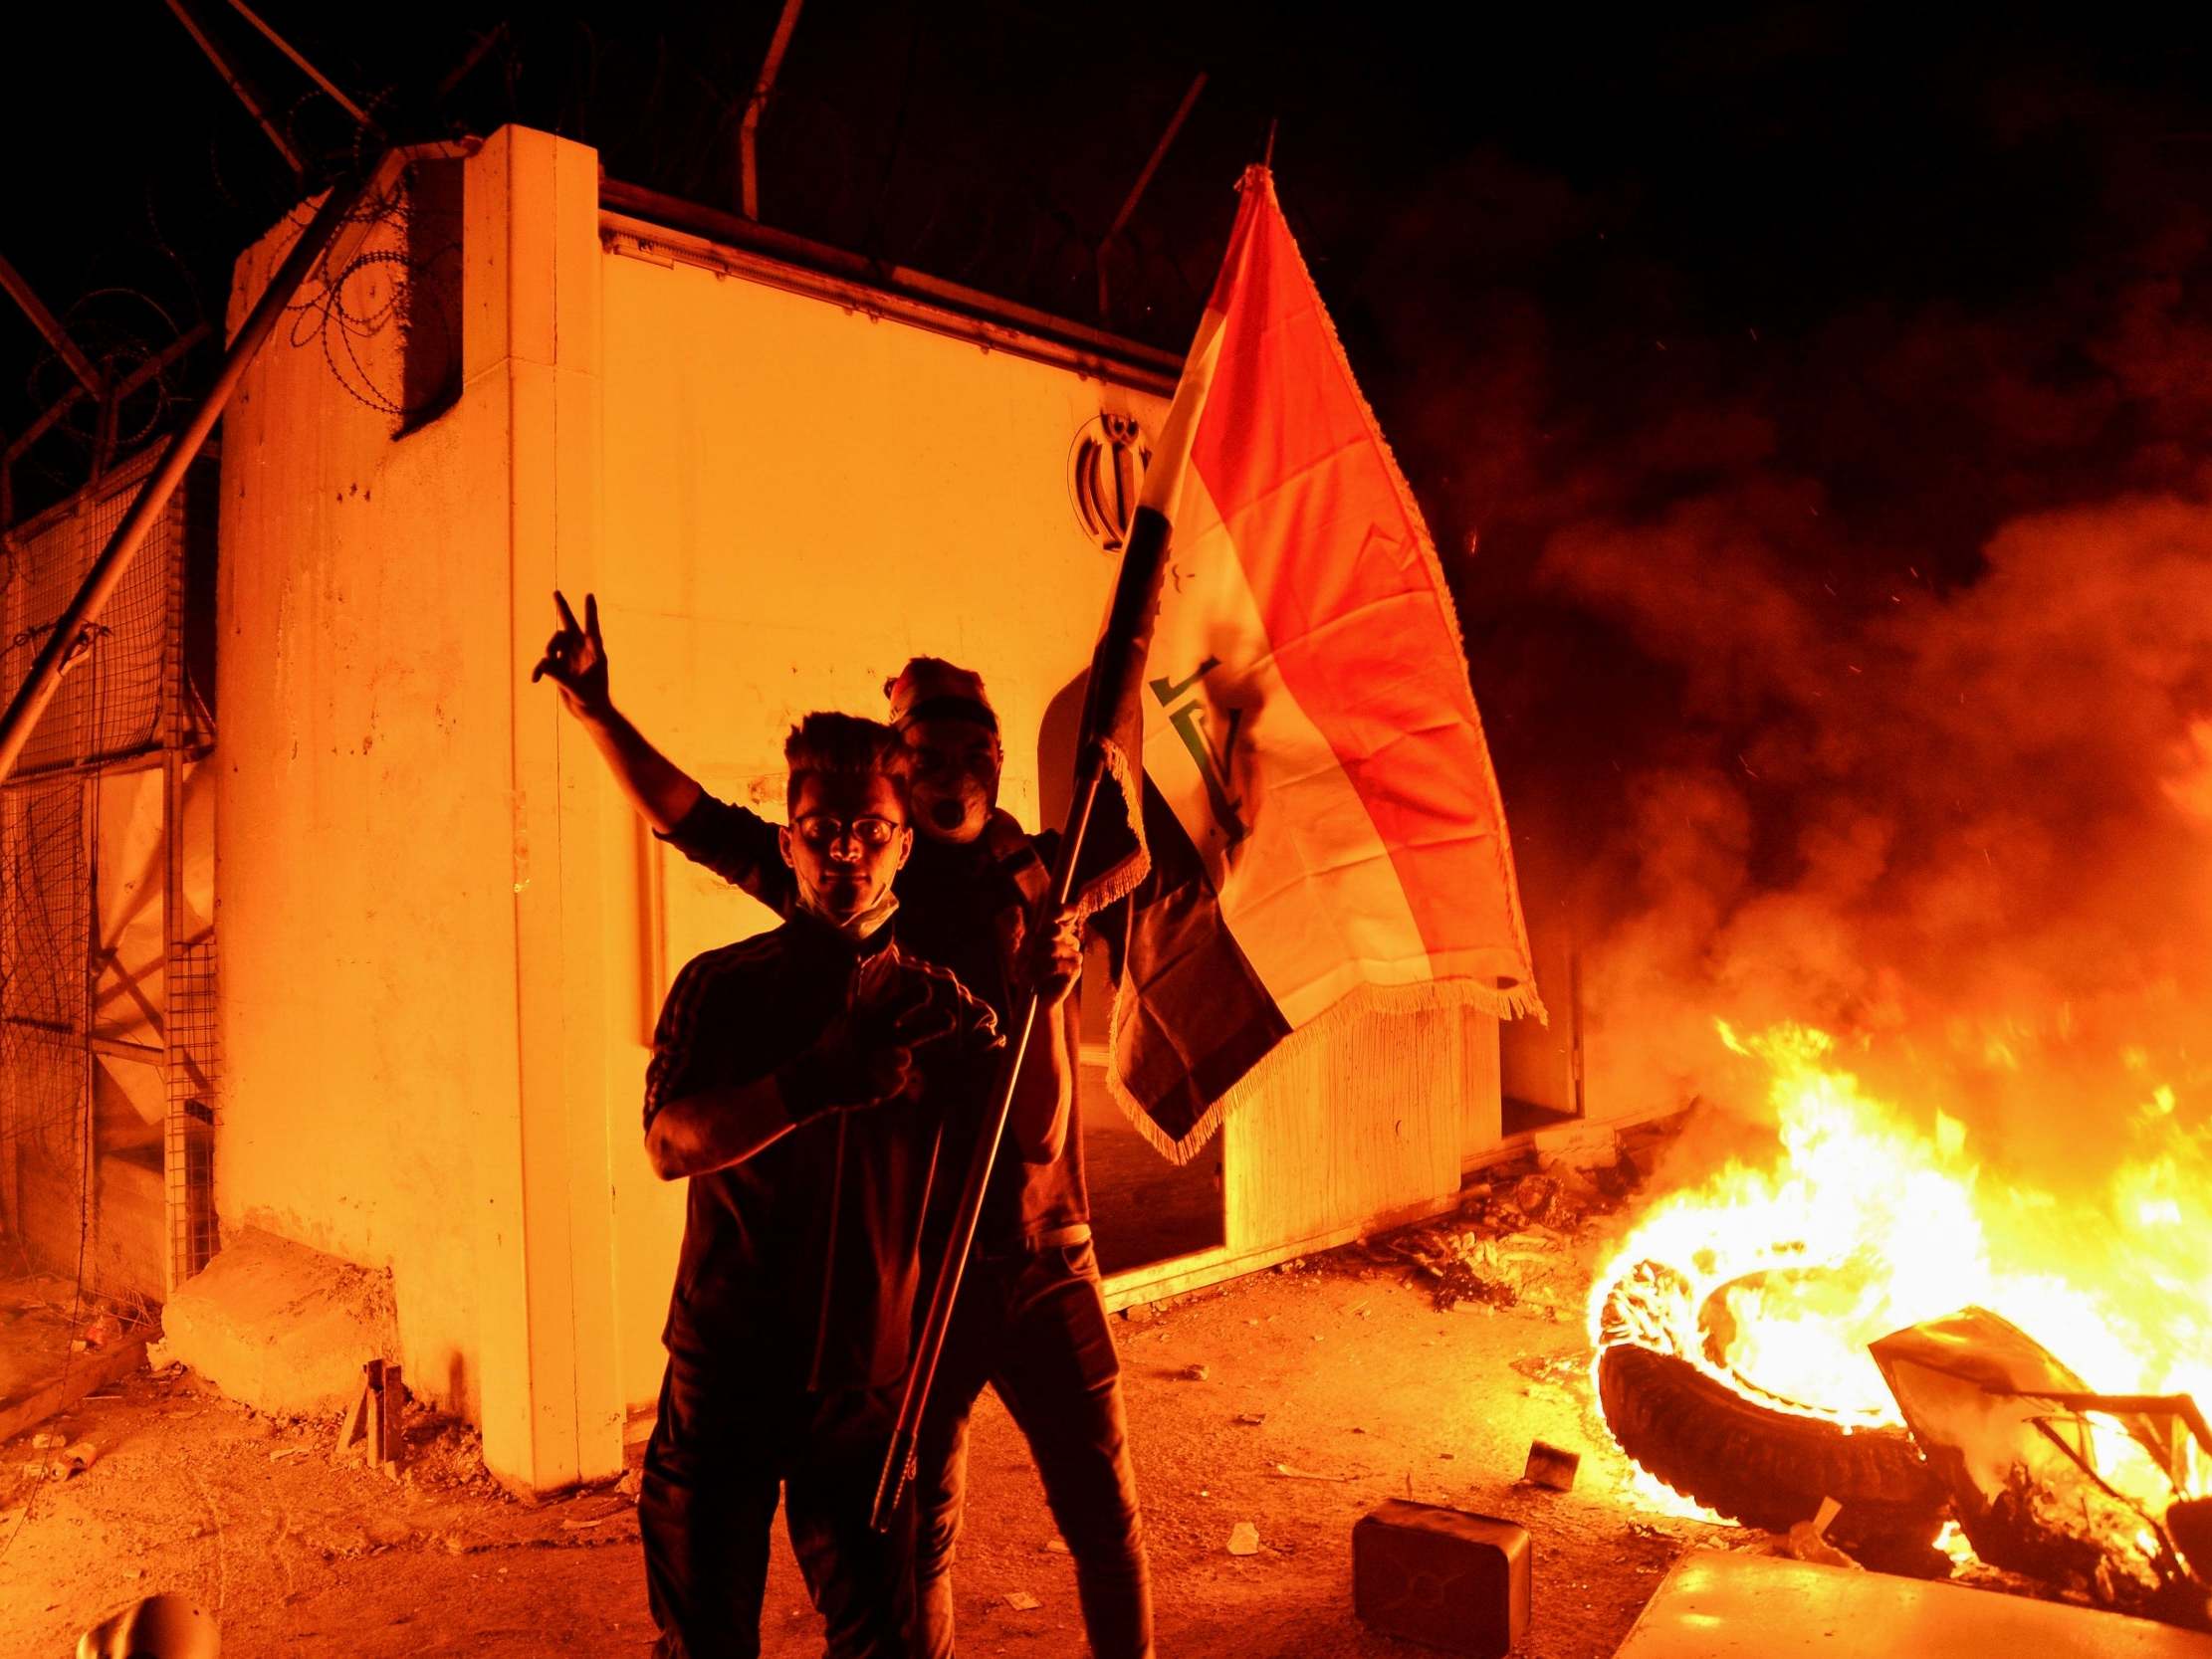 Iraqi demonstrators gesture as flames start consuming Iran’s consulate in the southern Iraqi Shia holy city Najaf